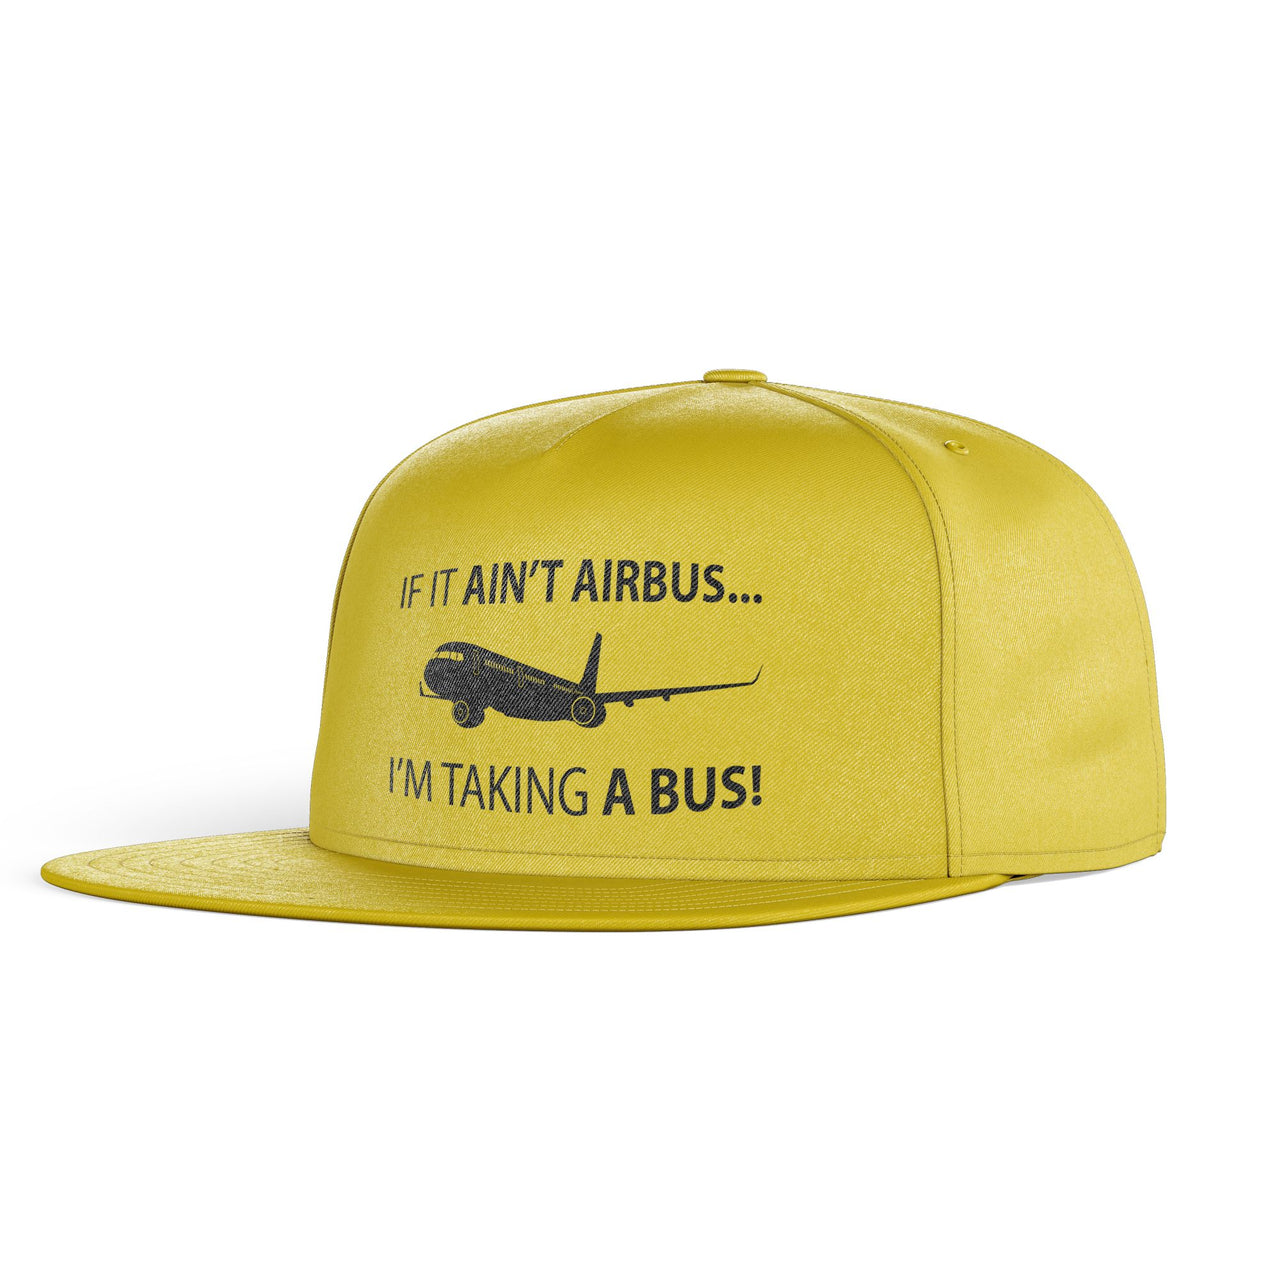 If It Ain't Airbus I'm Taking A Bus Designed Snapback Caps & Hats